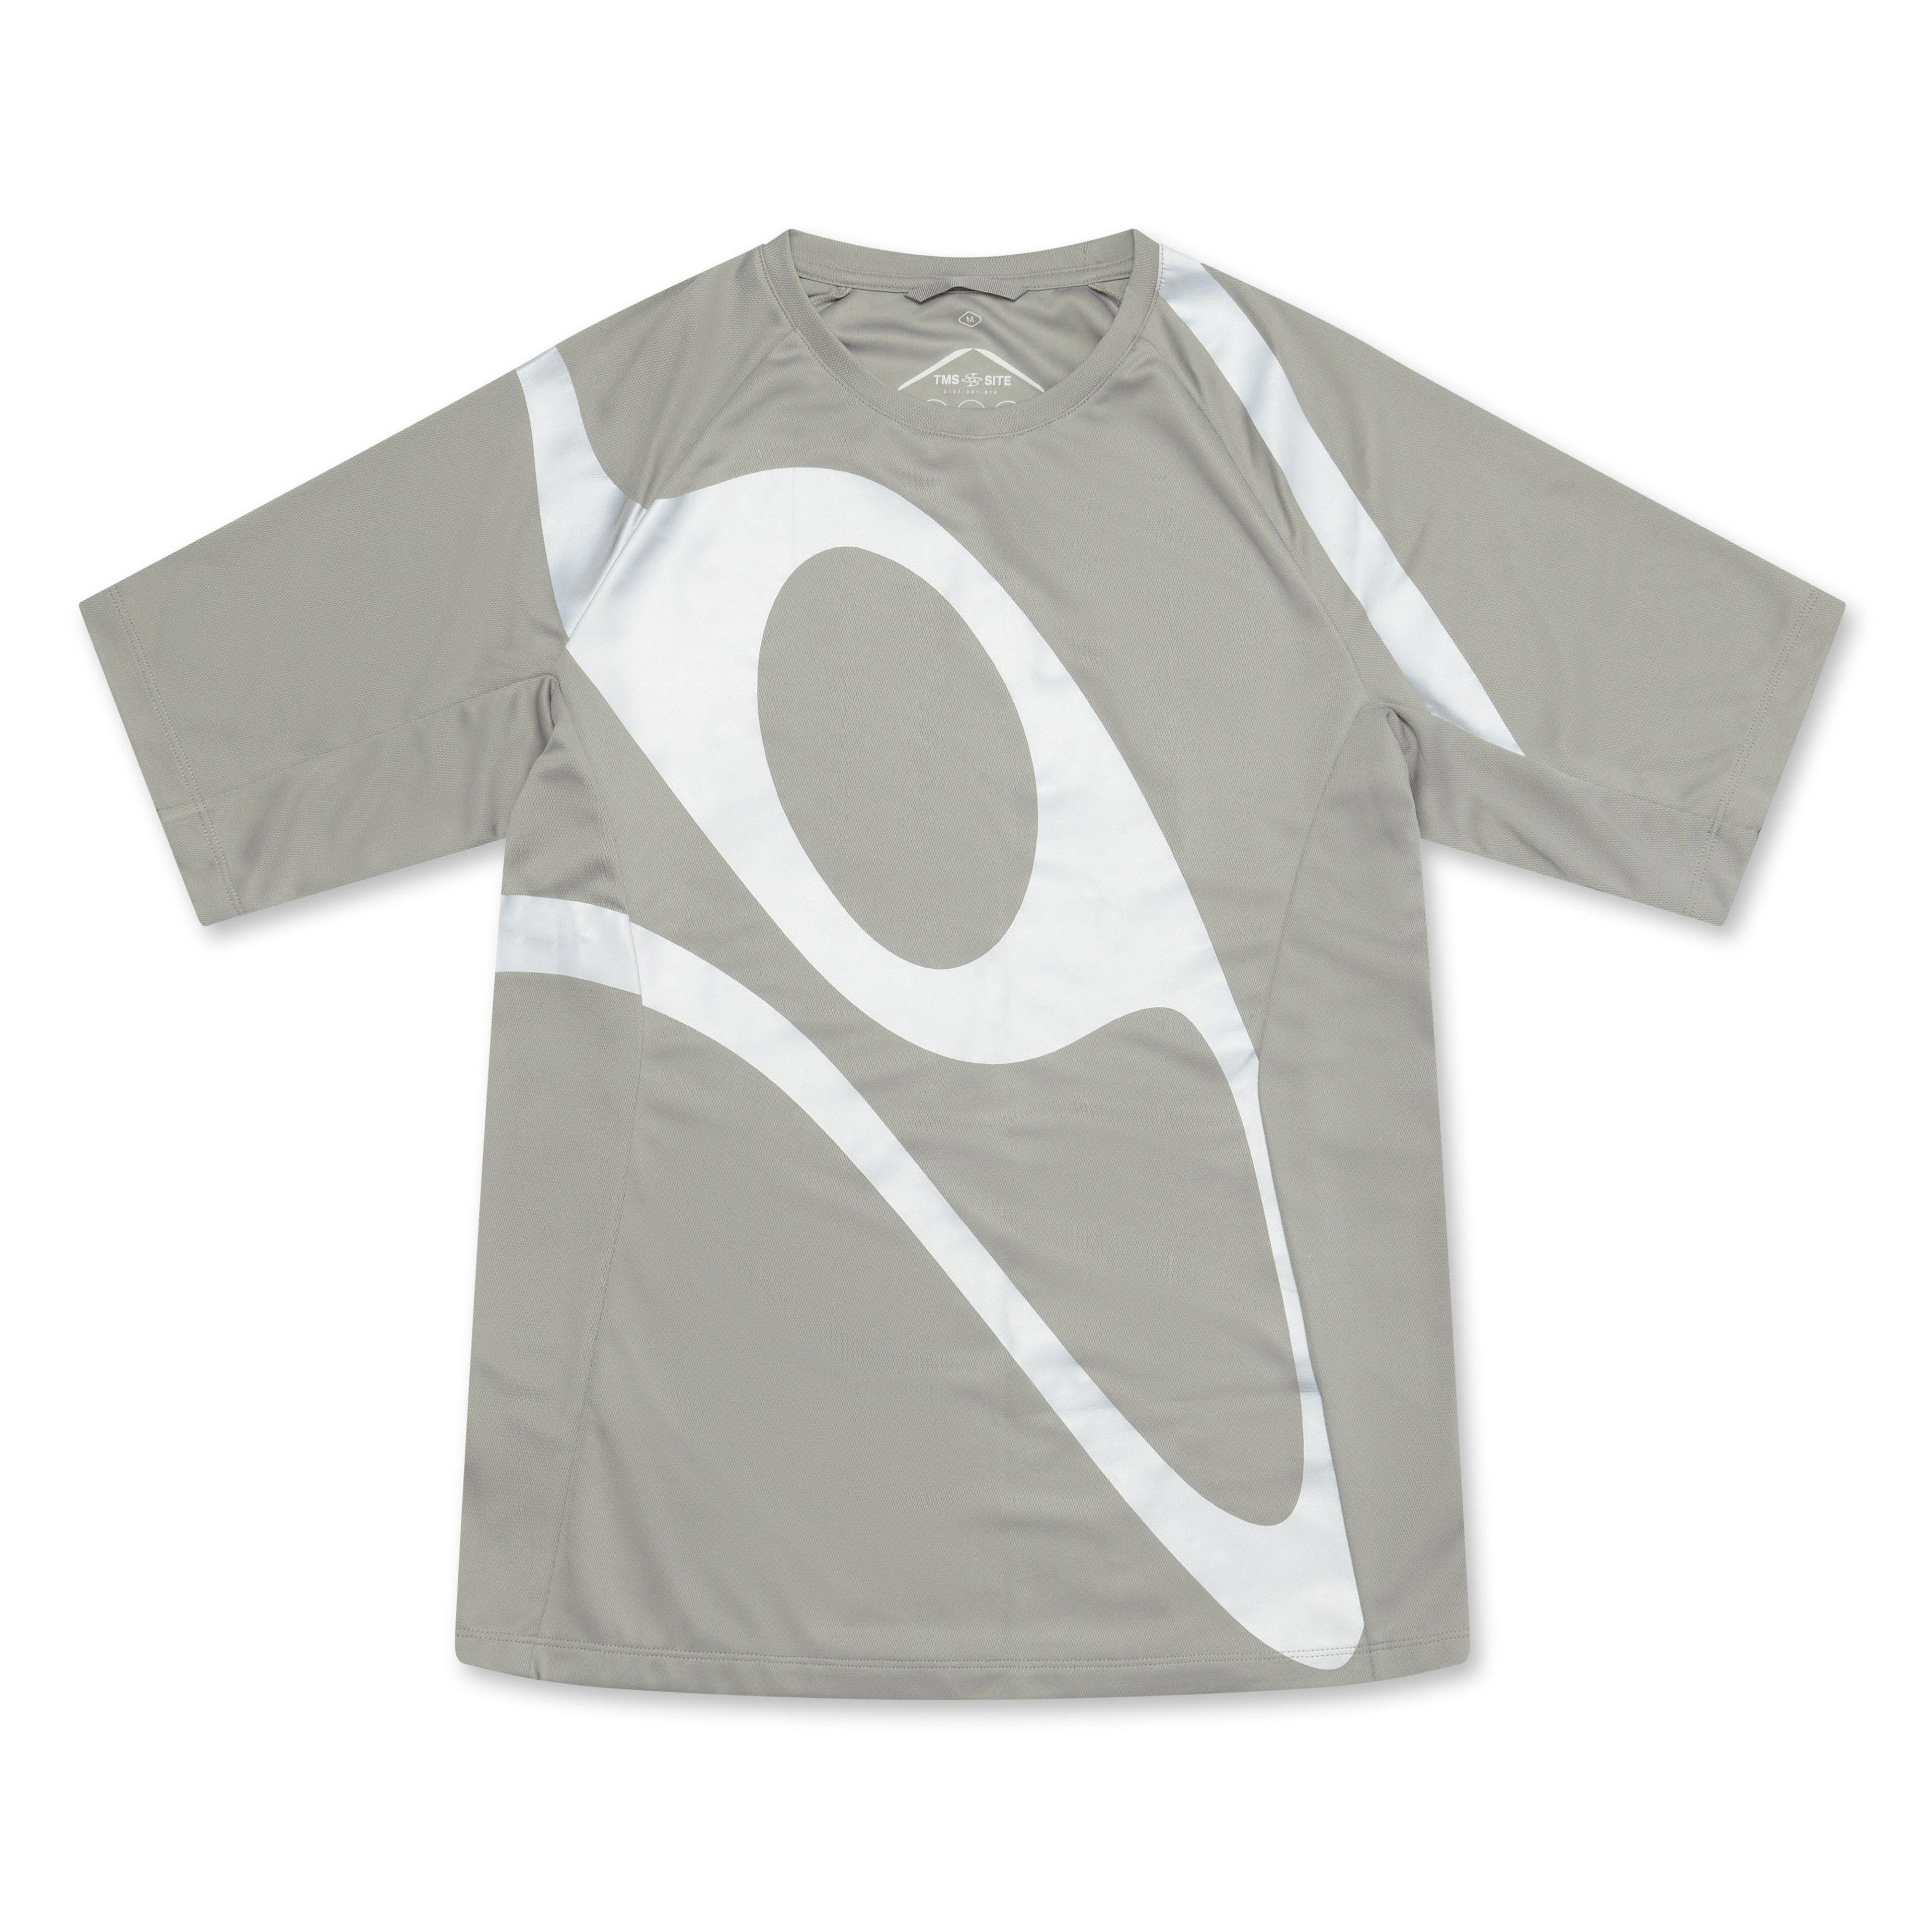 Tms.Site - Men's Reflective Quick Dry T-Shirt - (Grey) by TMS.SITE